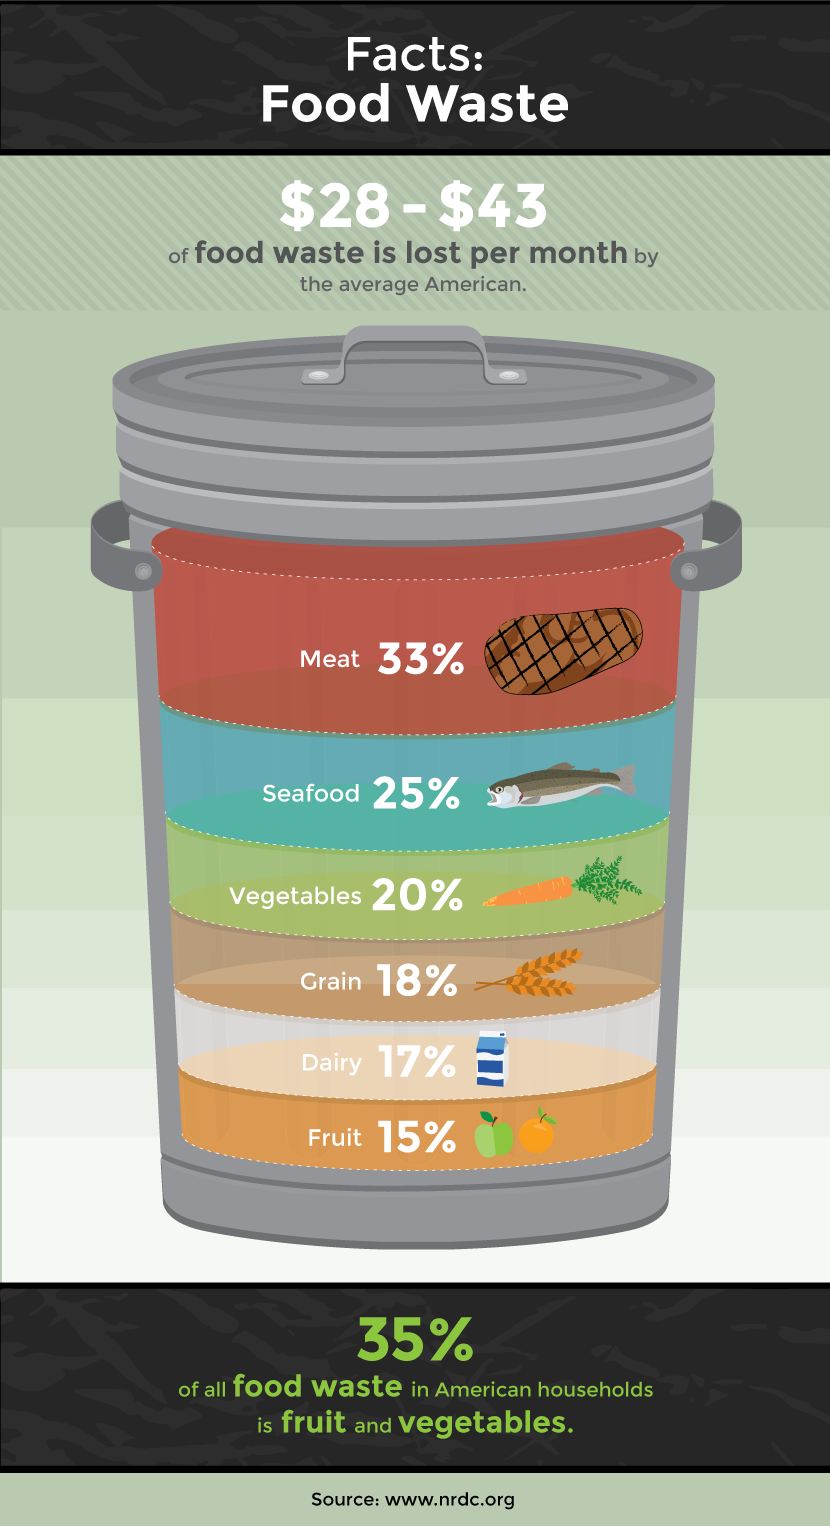 Regrow Vegetables from Scraps: Facts on Food Waste